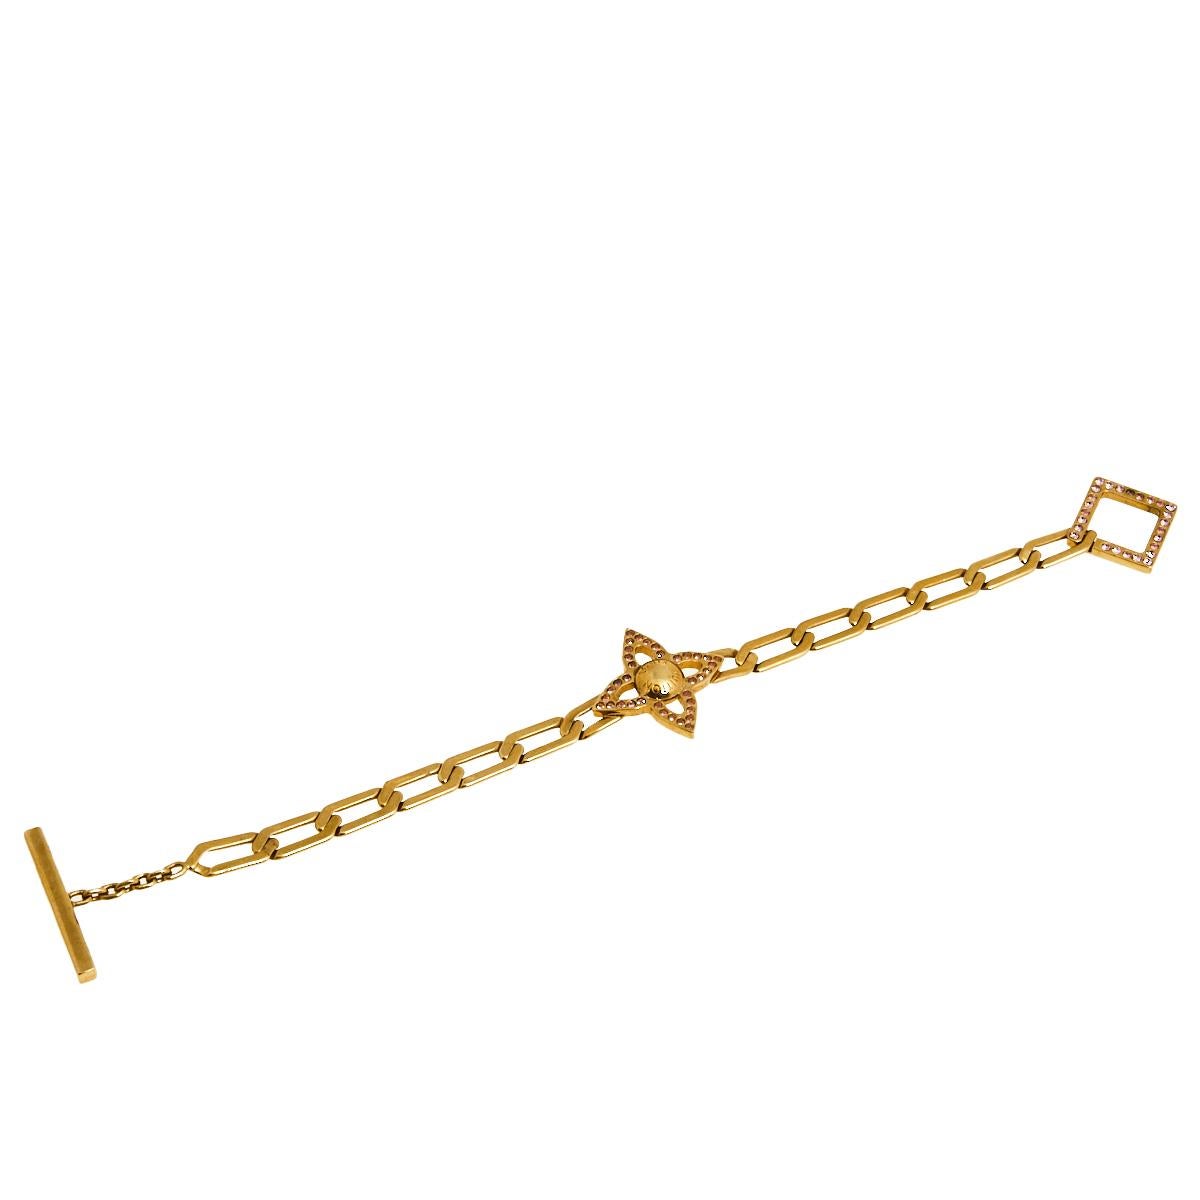 How pretty is this bracelet from Louis Vuitton! From dinner outfits to casual summer dresses, this bracelet can elevate your style and add a delicate accent to your wrist. It is made from gold-tone metal and added with an embellished flower motif